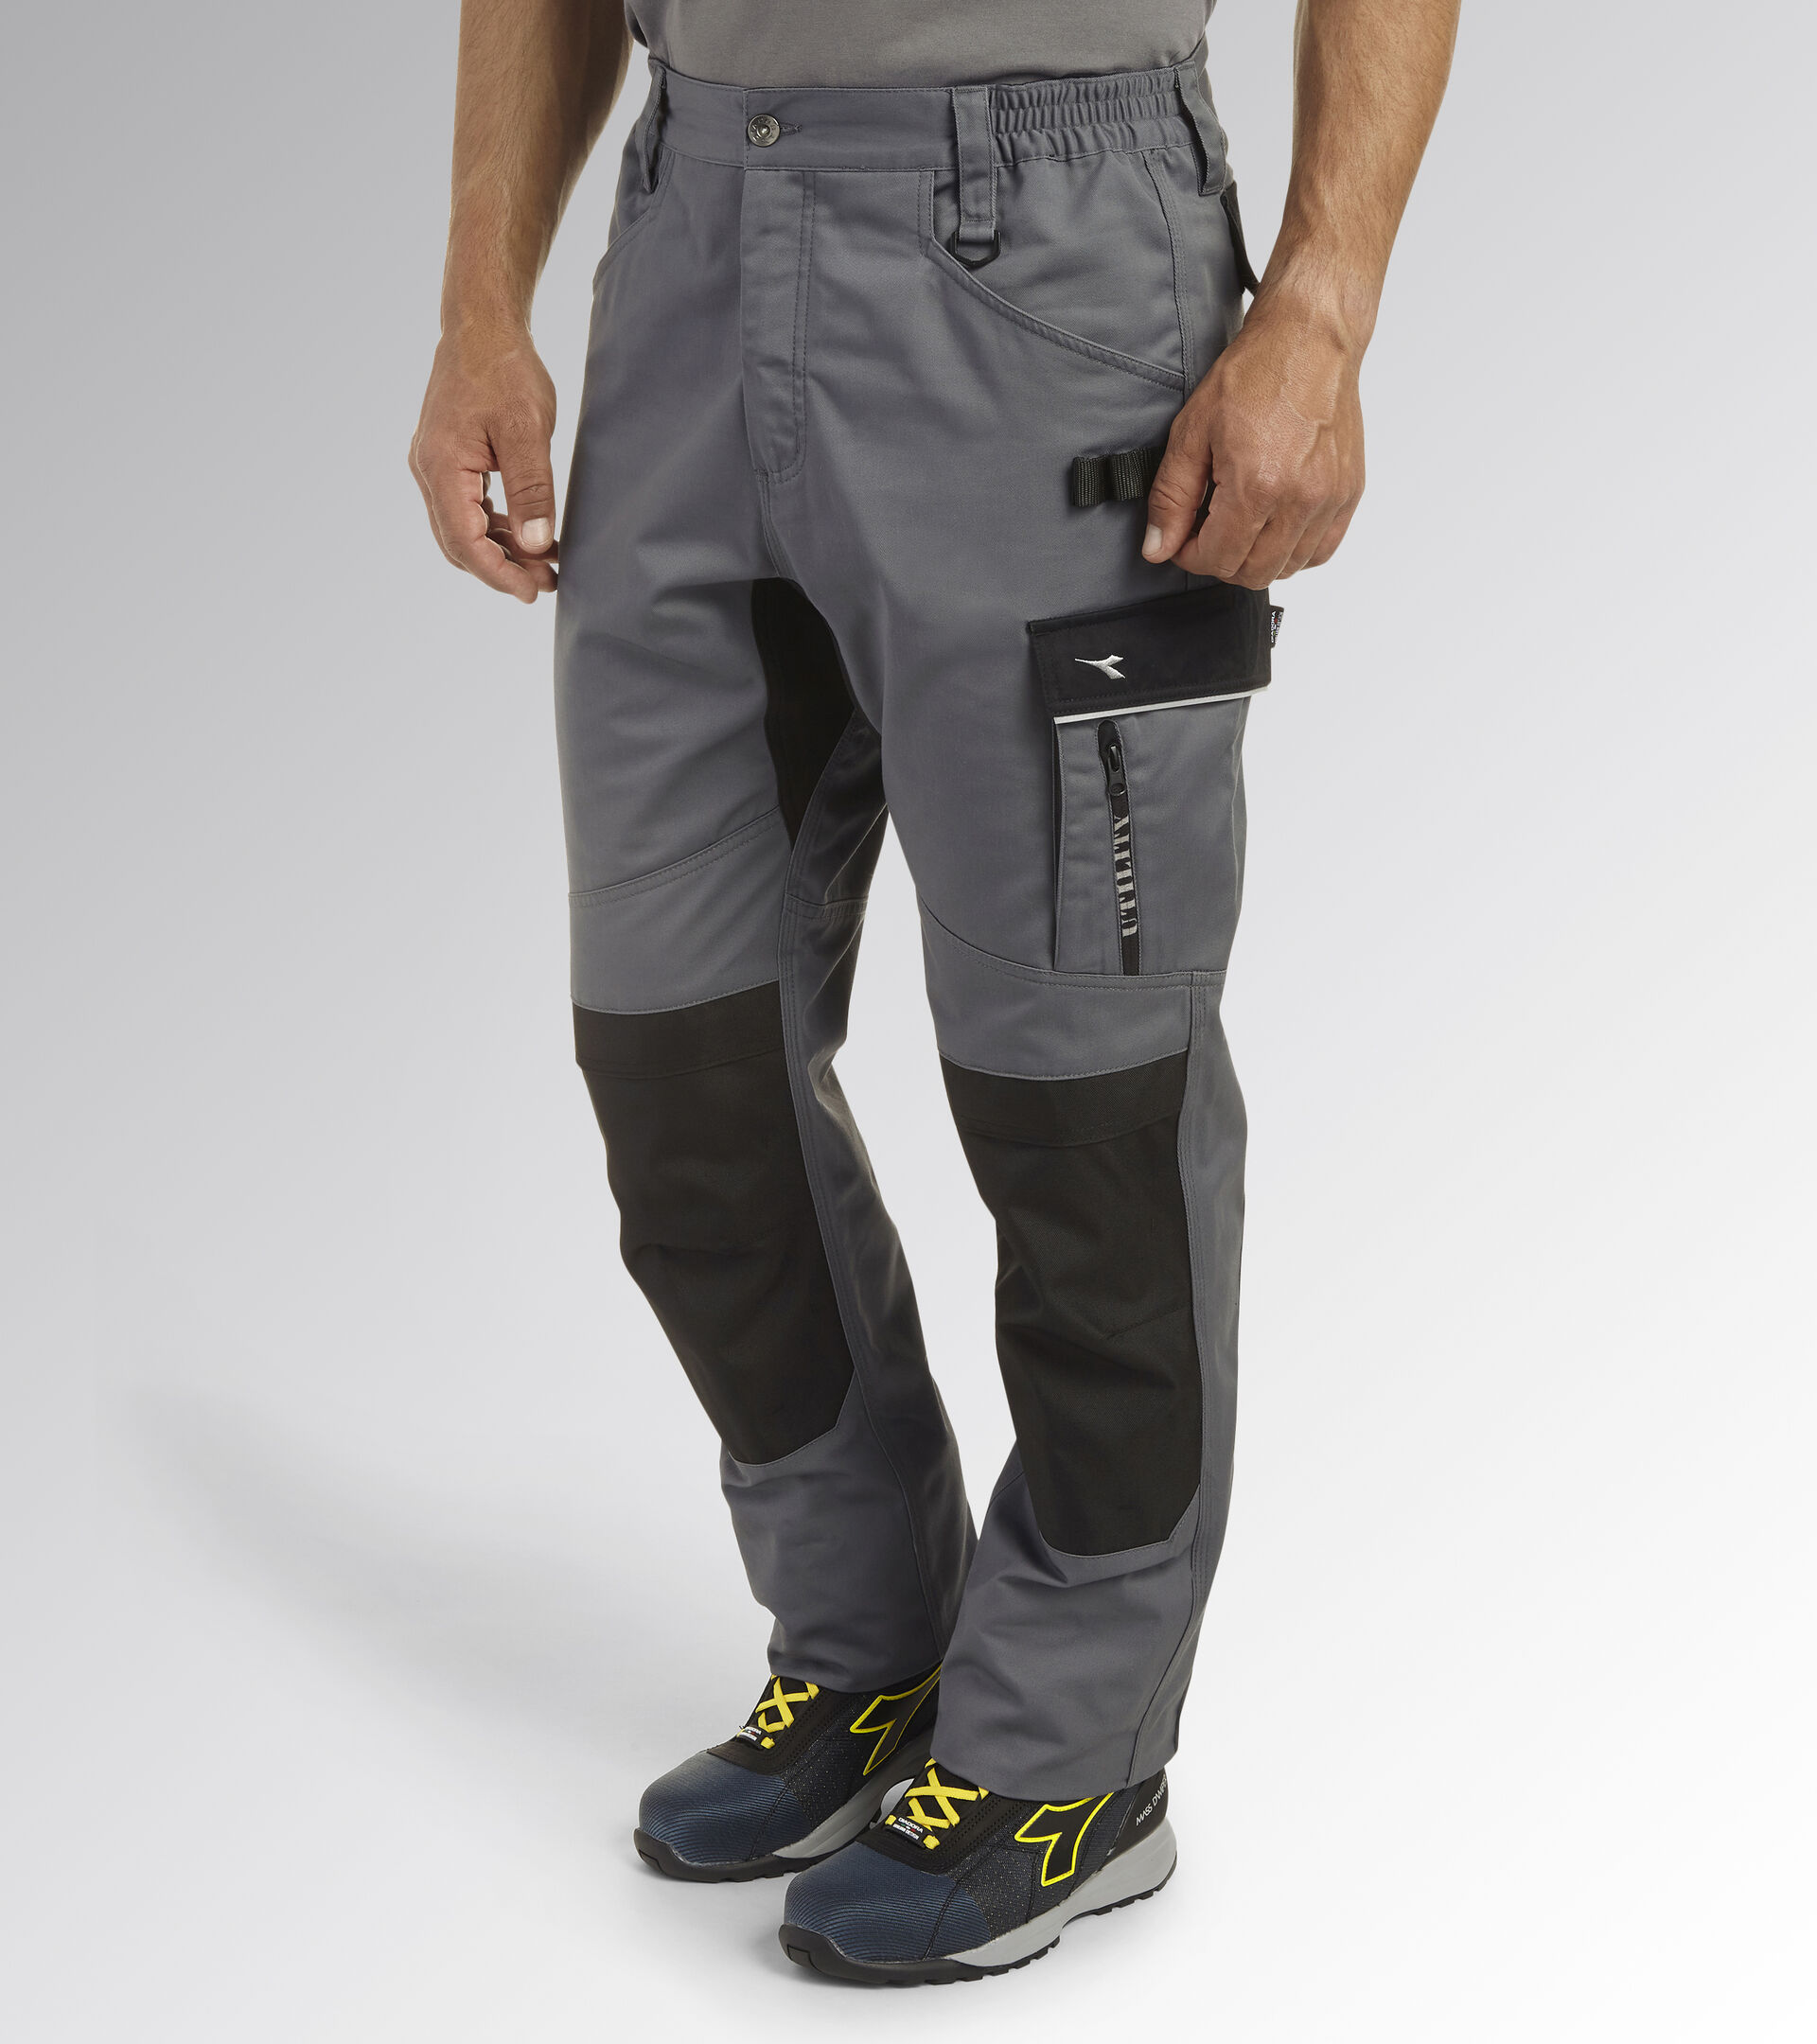 Work trousers PANT EASYWORK LIGHT PERF STEEL GRAY - Utility